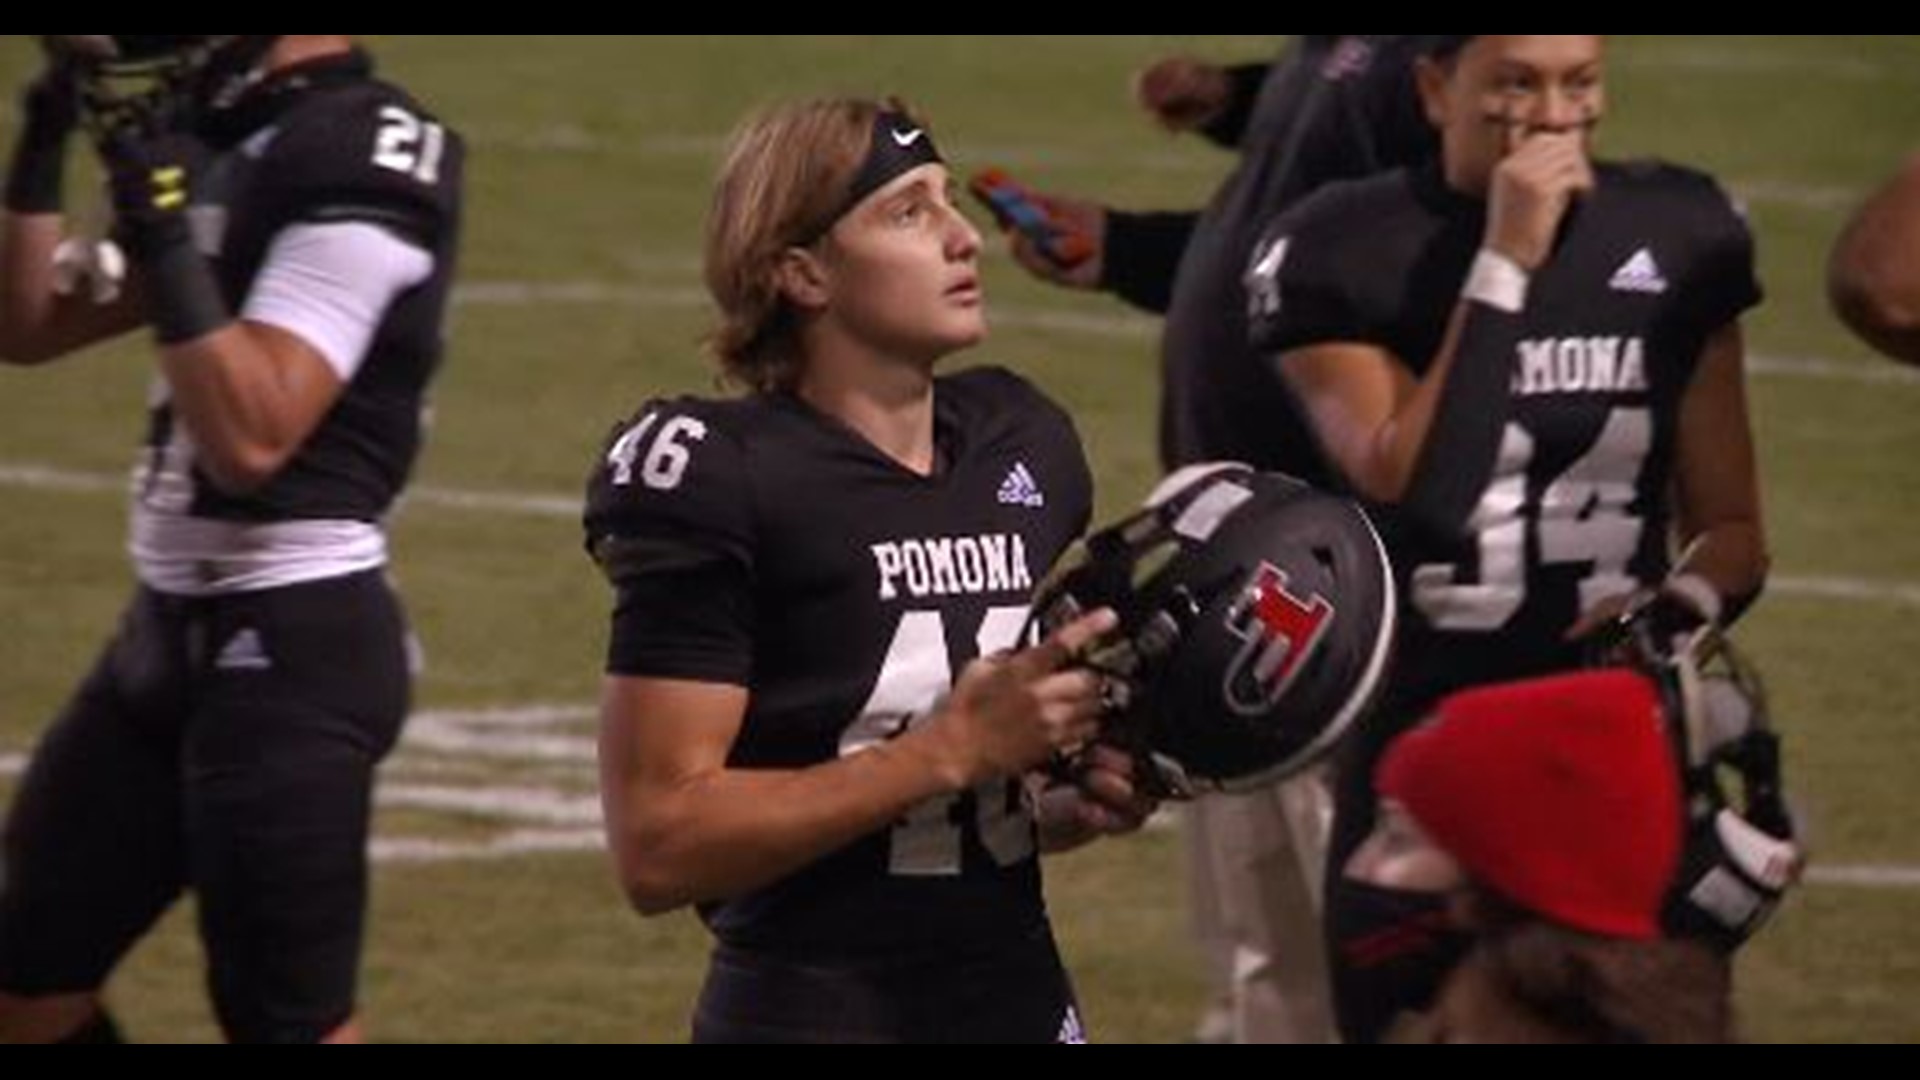 Pomona senior Marcus Geypens is playing in the state semifinals only 17 months after suffering a near-fatal accident that left him intubated with internal injuries.